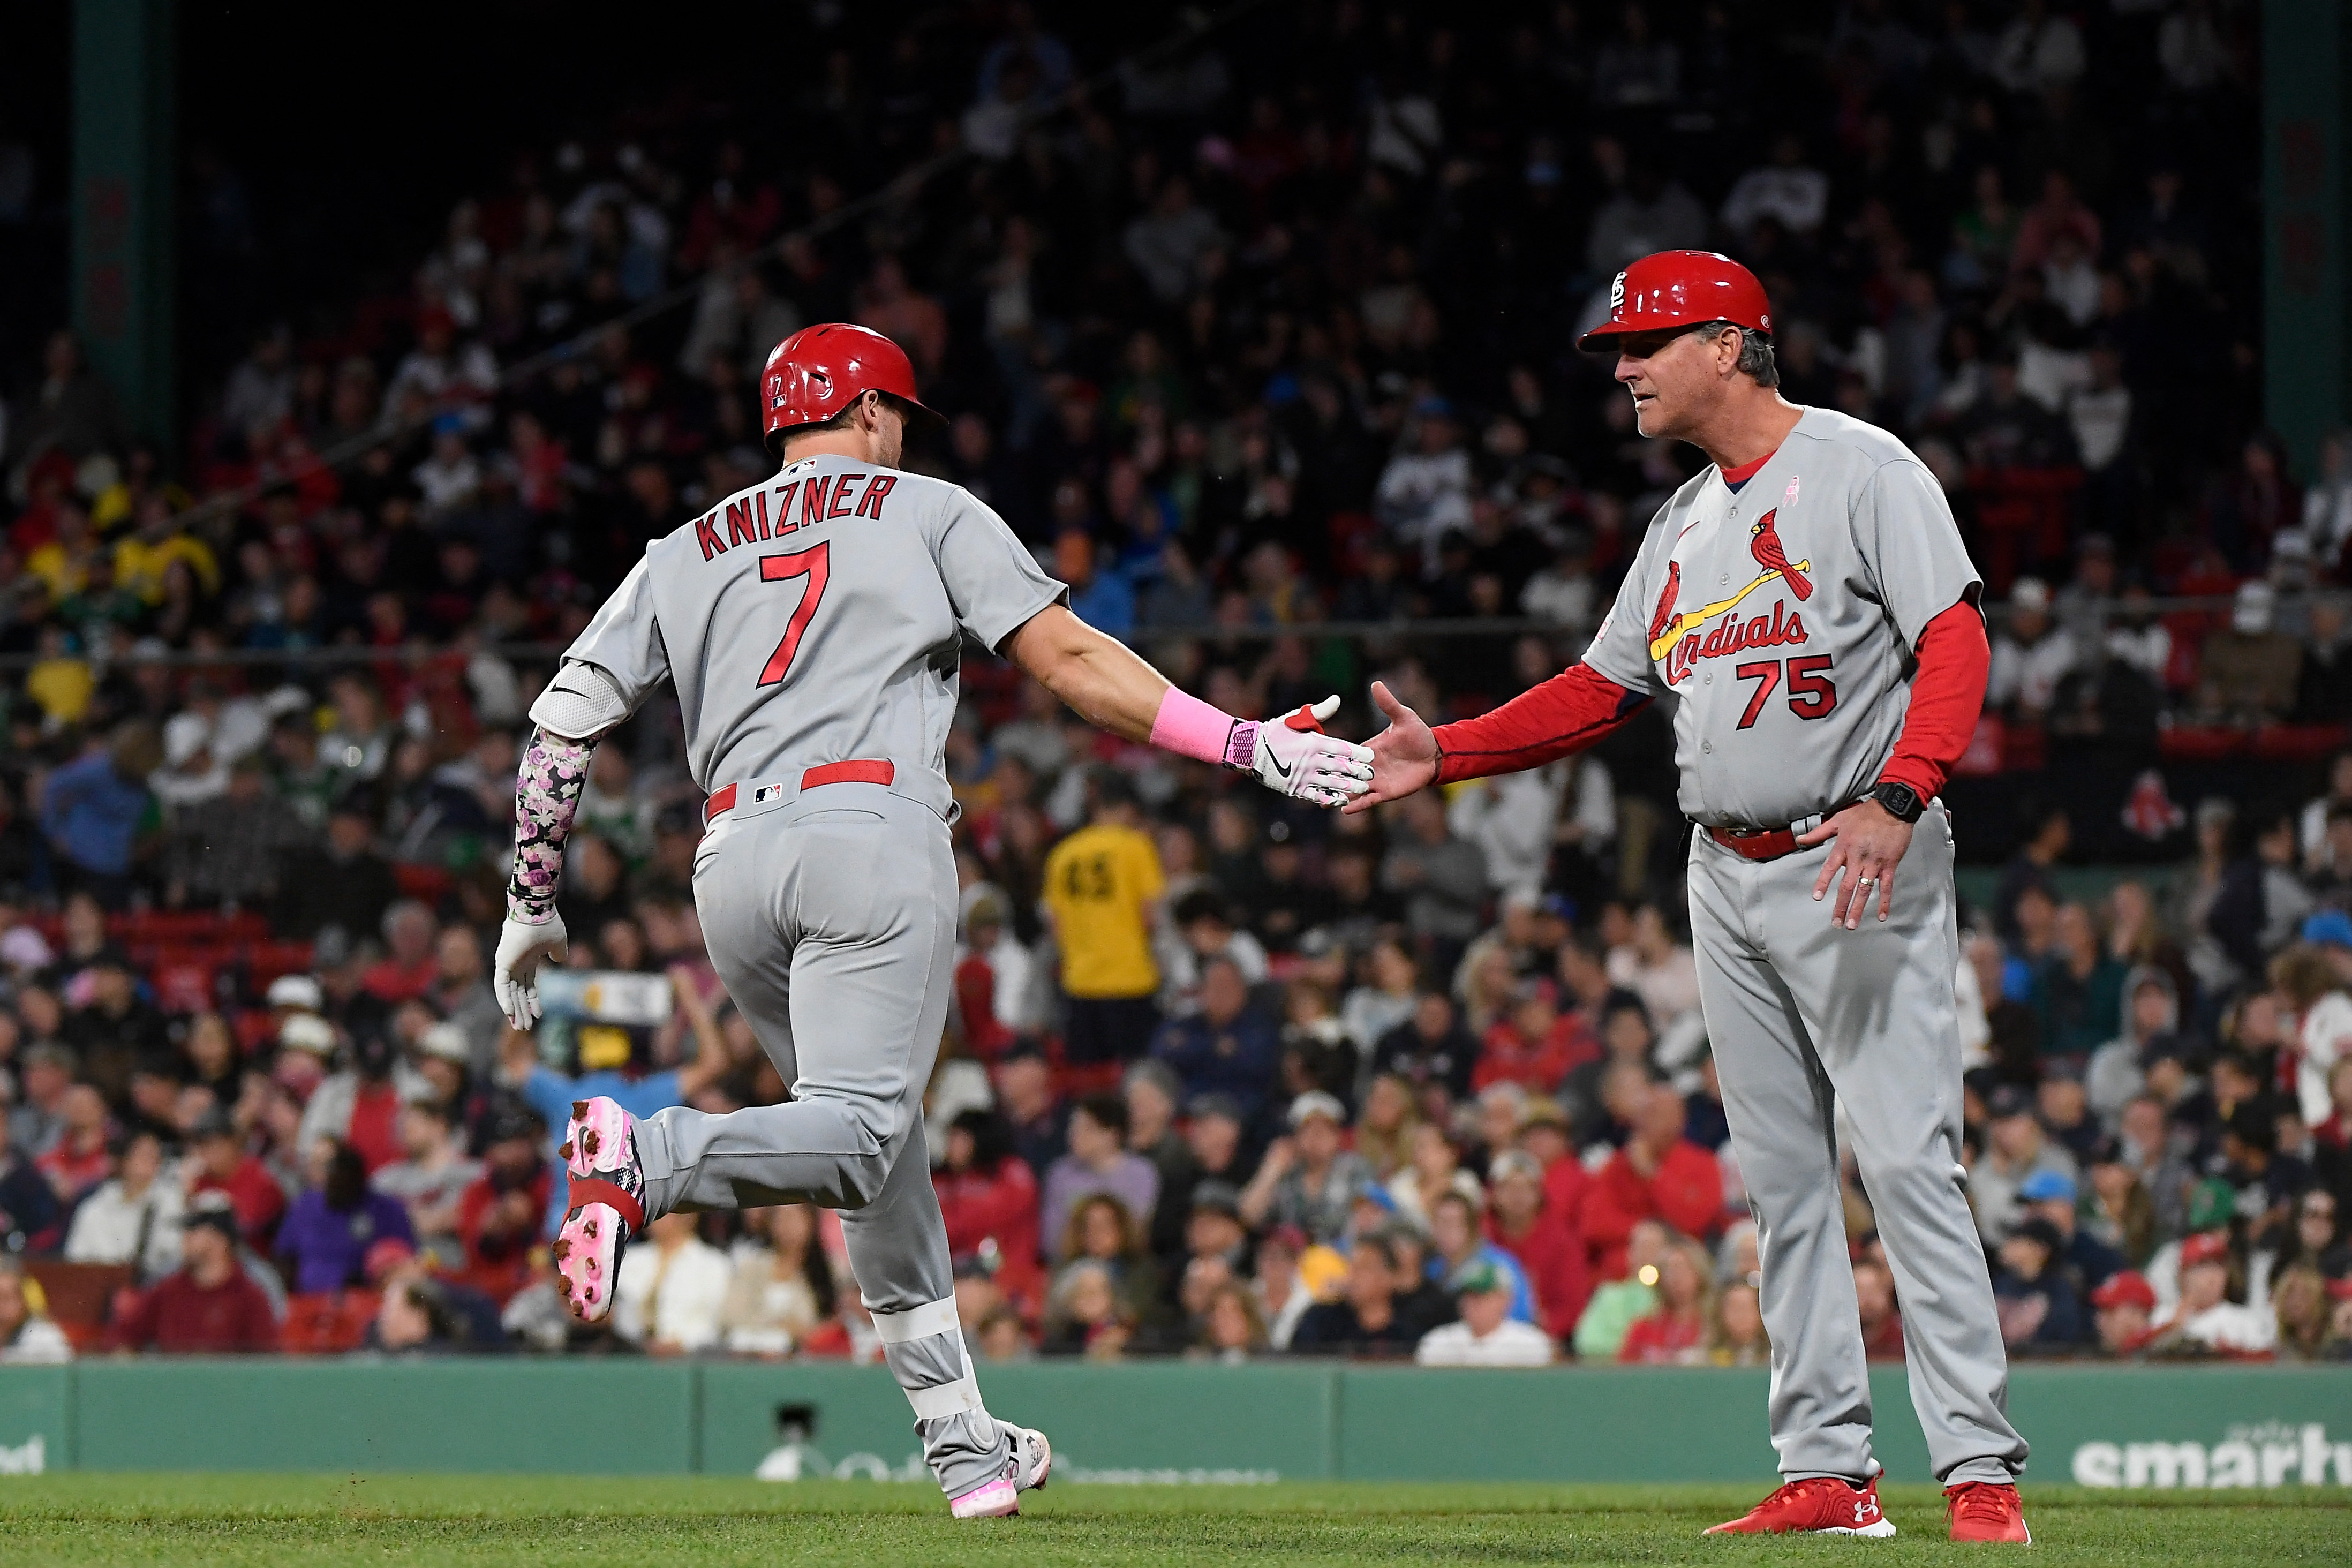 Cardinals complete 3-game sweep with 9-1 rout of Red Sox